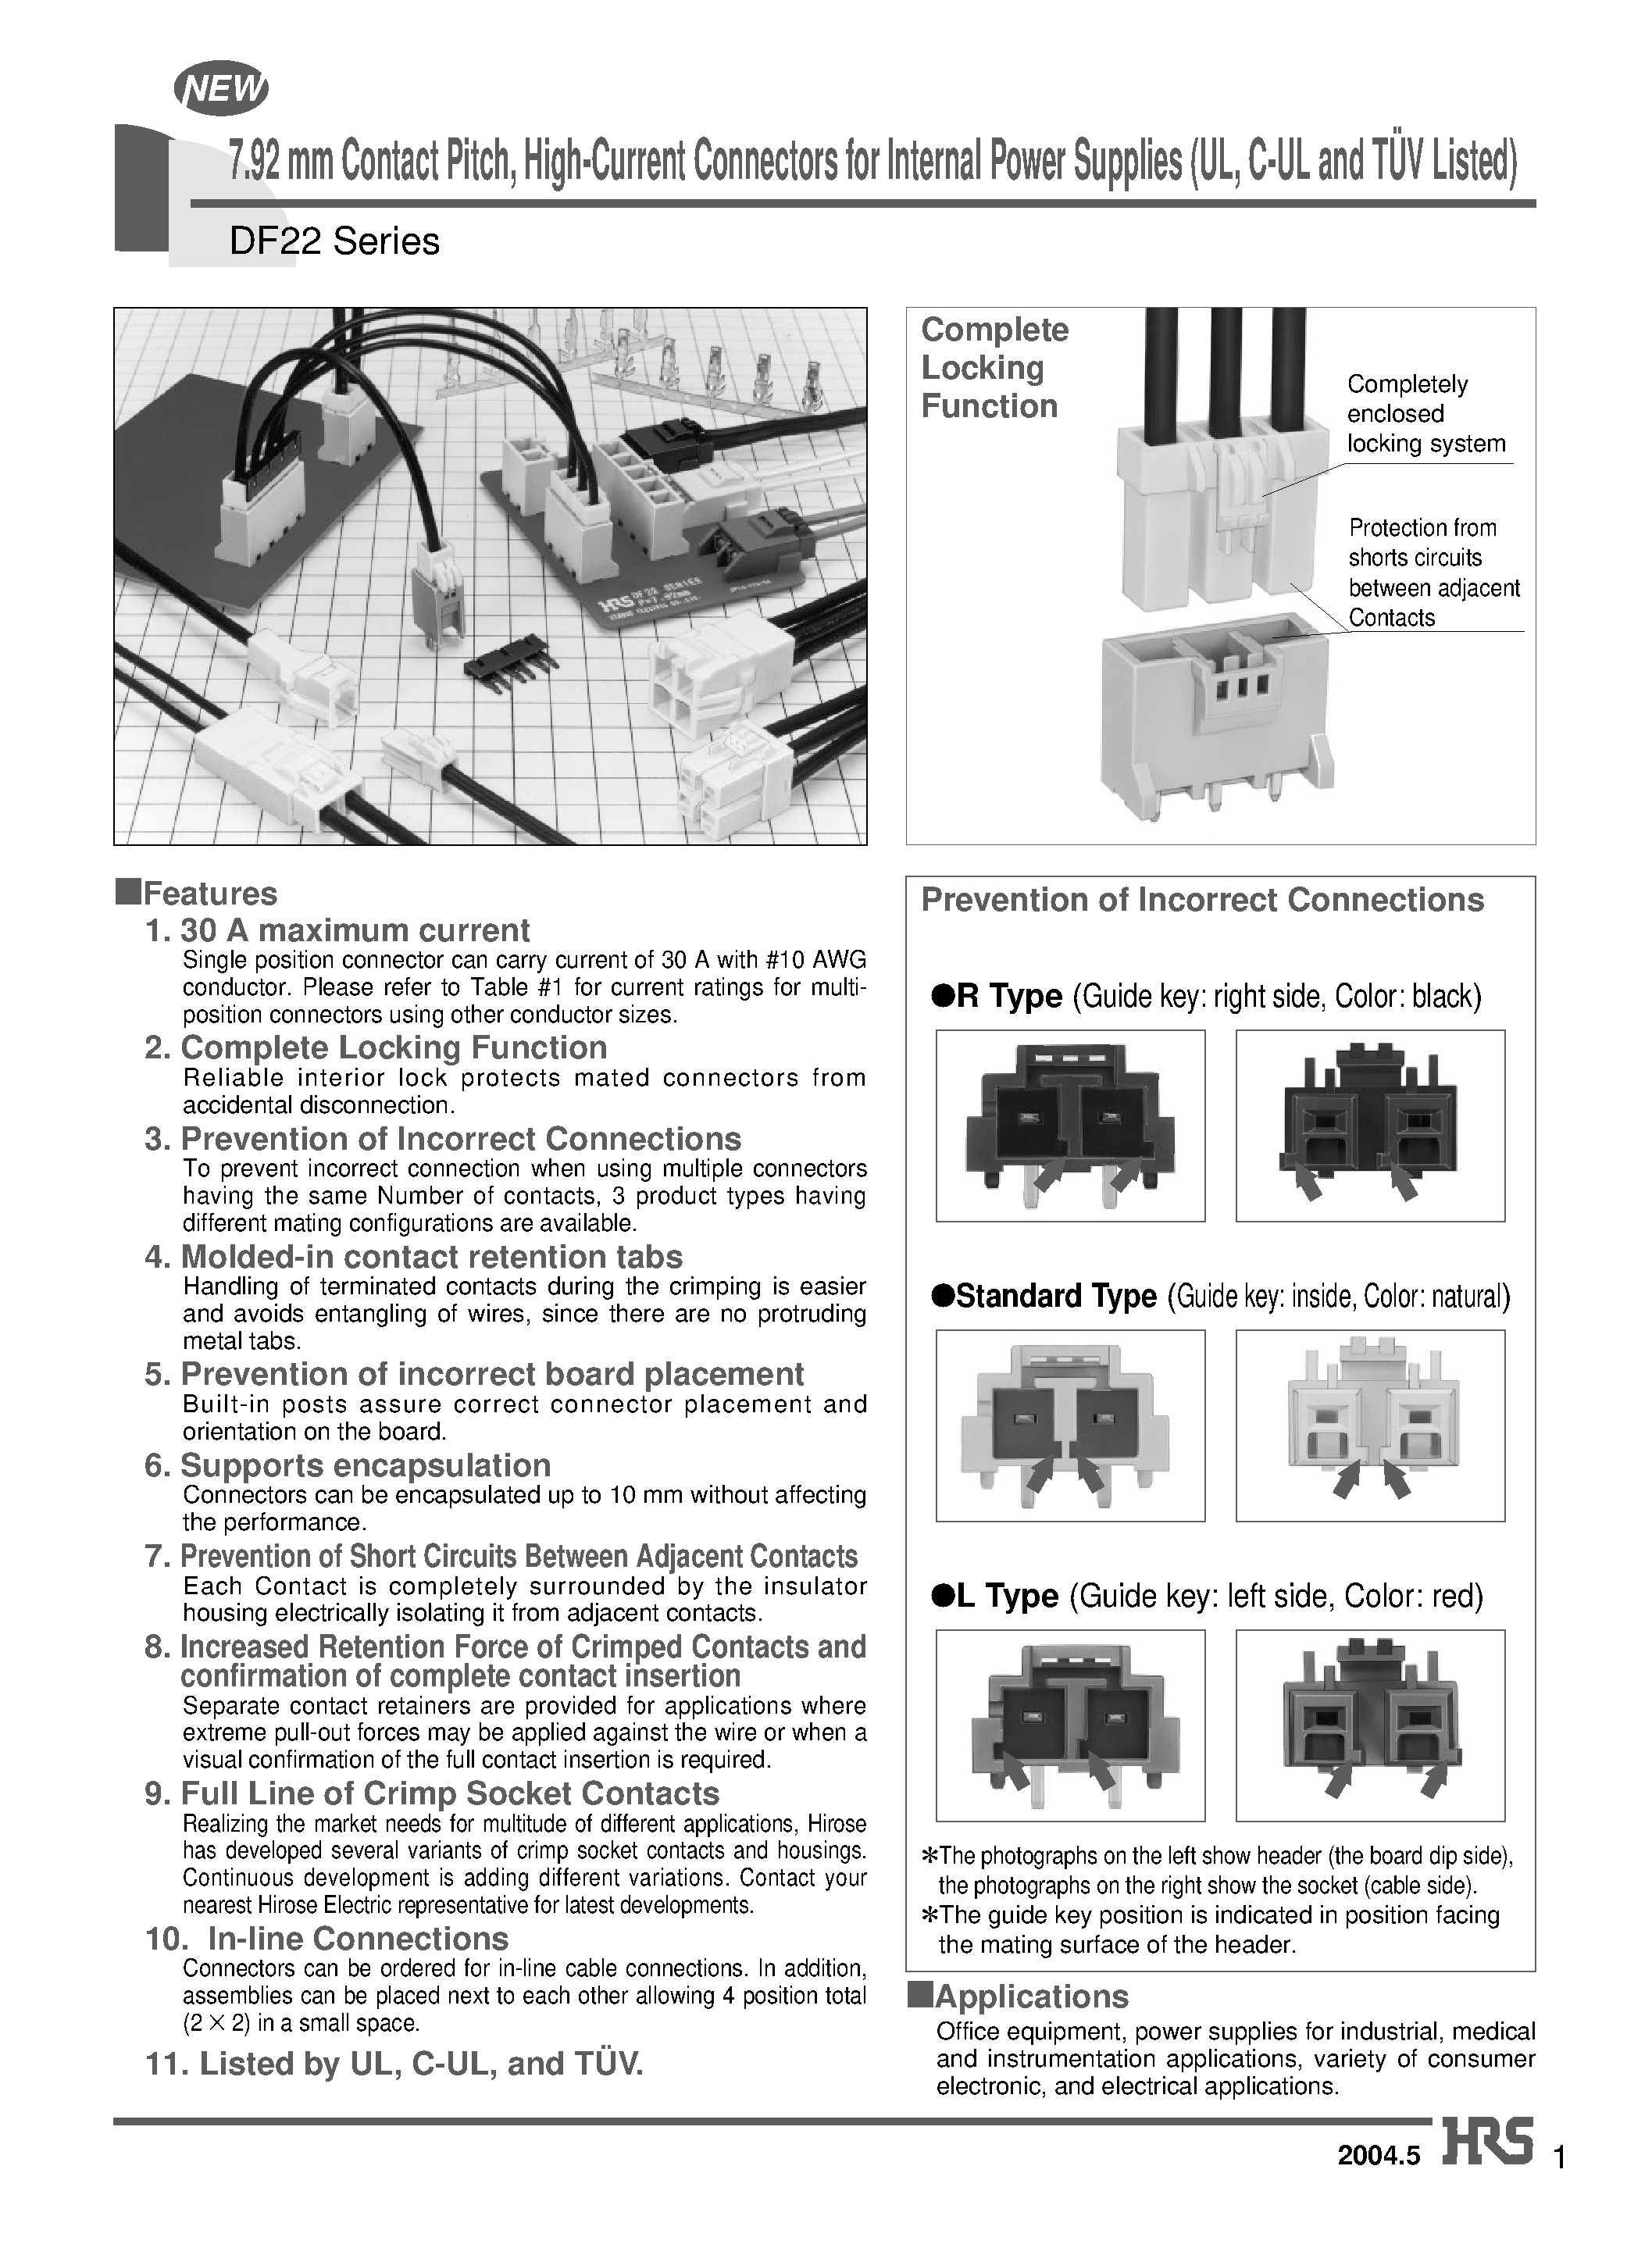 Datasheet DF22-2S-7.92DSA - 7.92 mm Contact Pitch/ High-Current Connectors for Internal Power Supplies (UL/ C-UL and TUV Listed) page 1